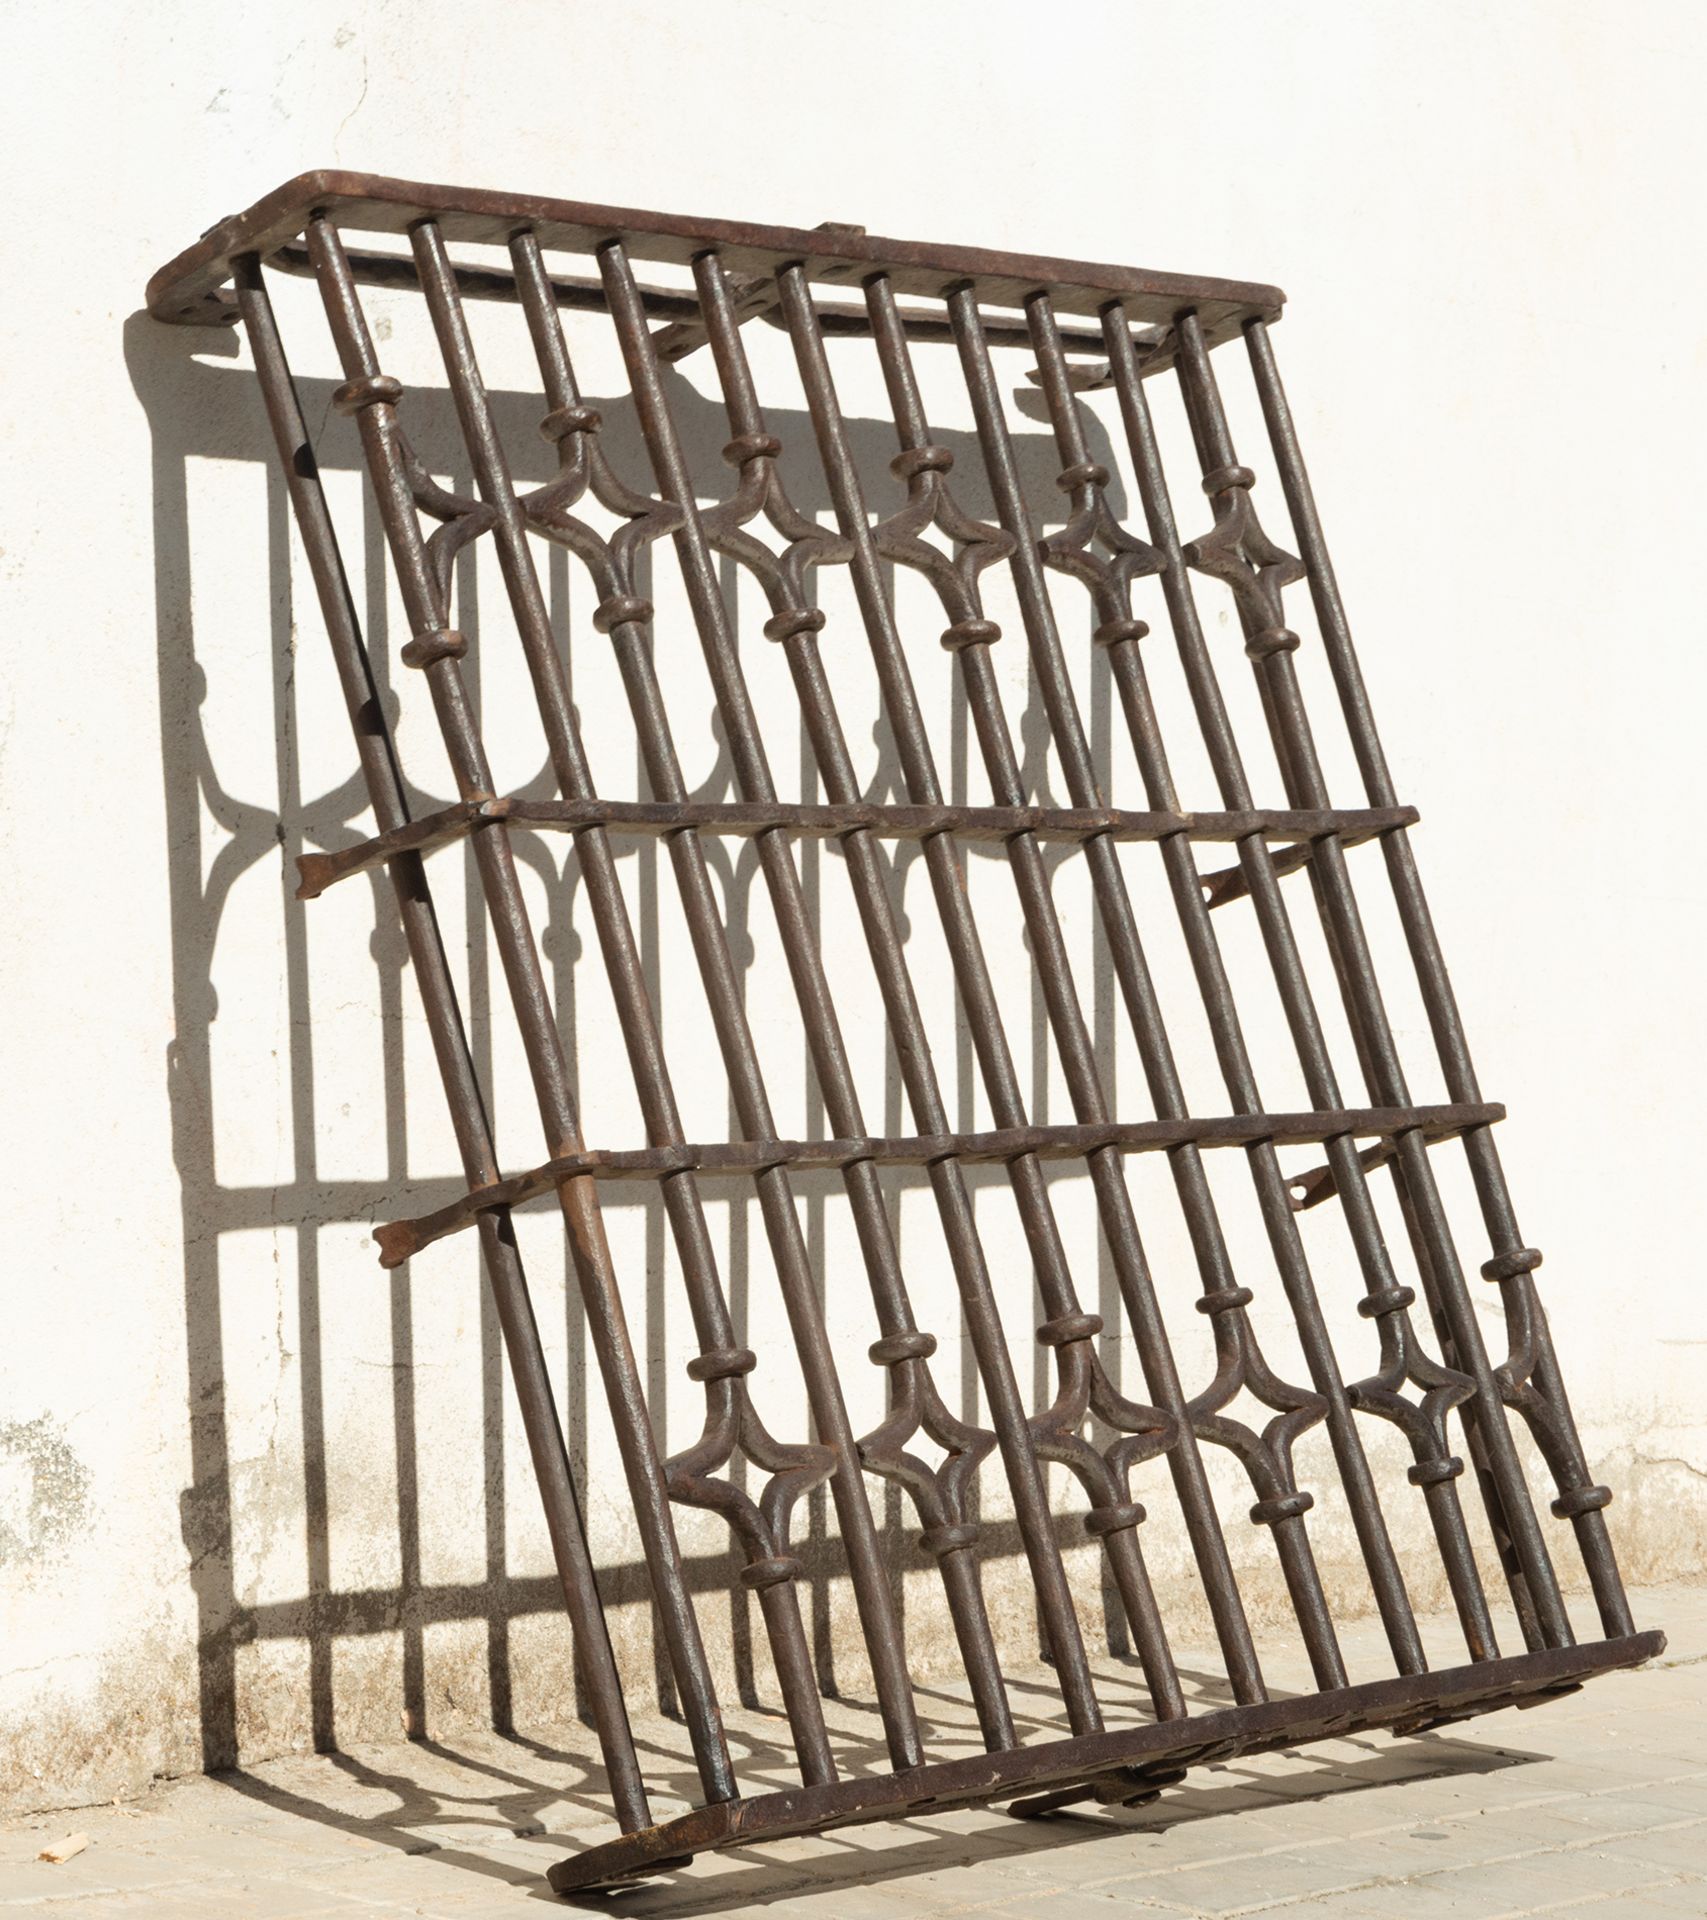 Wrought iron grill for window, 18th century - Image 2 of 3